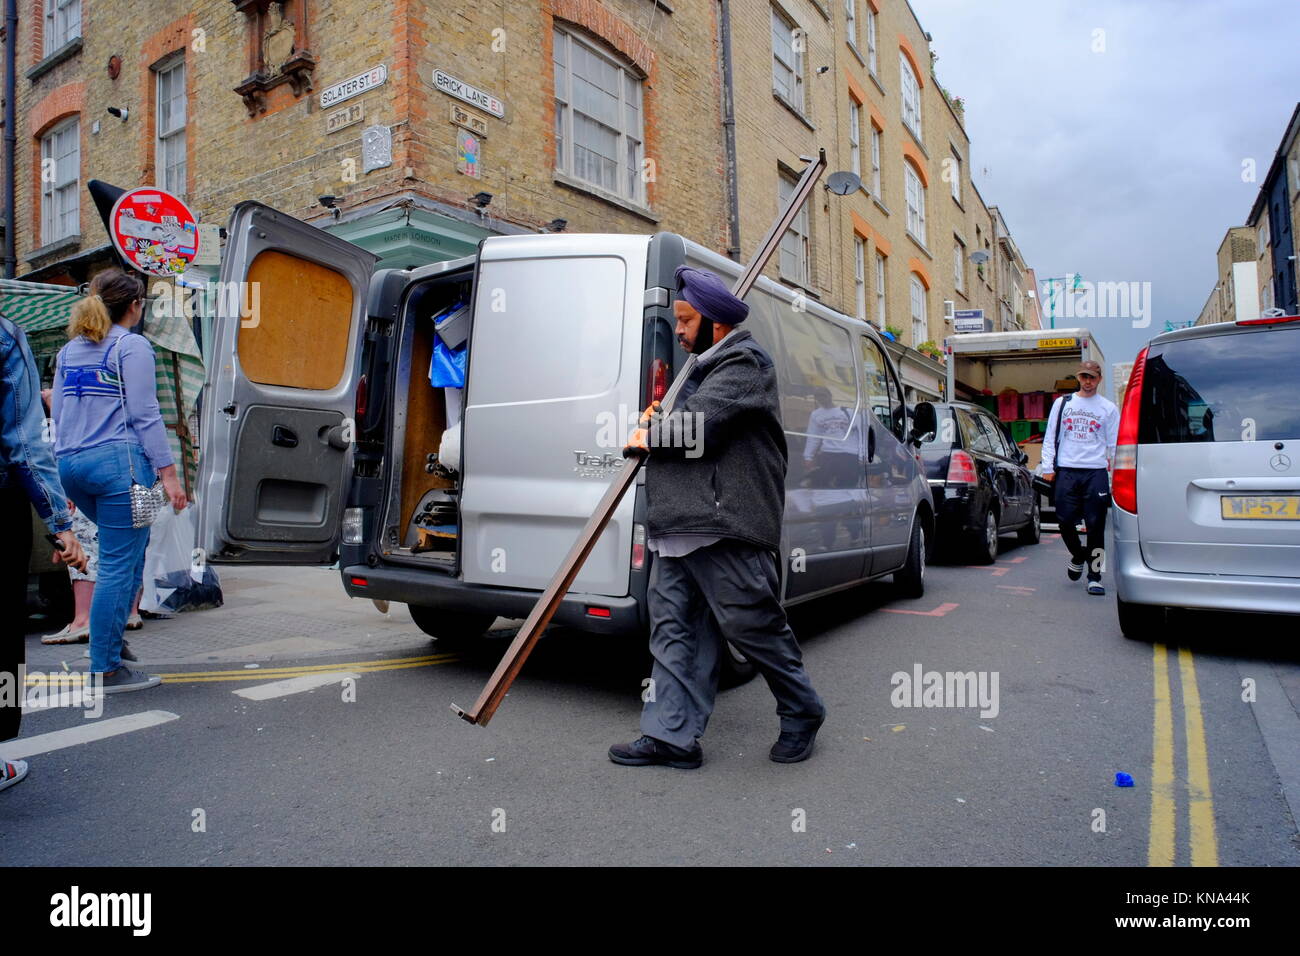 Sikh man carrying metal poles to a silver van in Shoreditch, London, England, UK Stock Photo